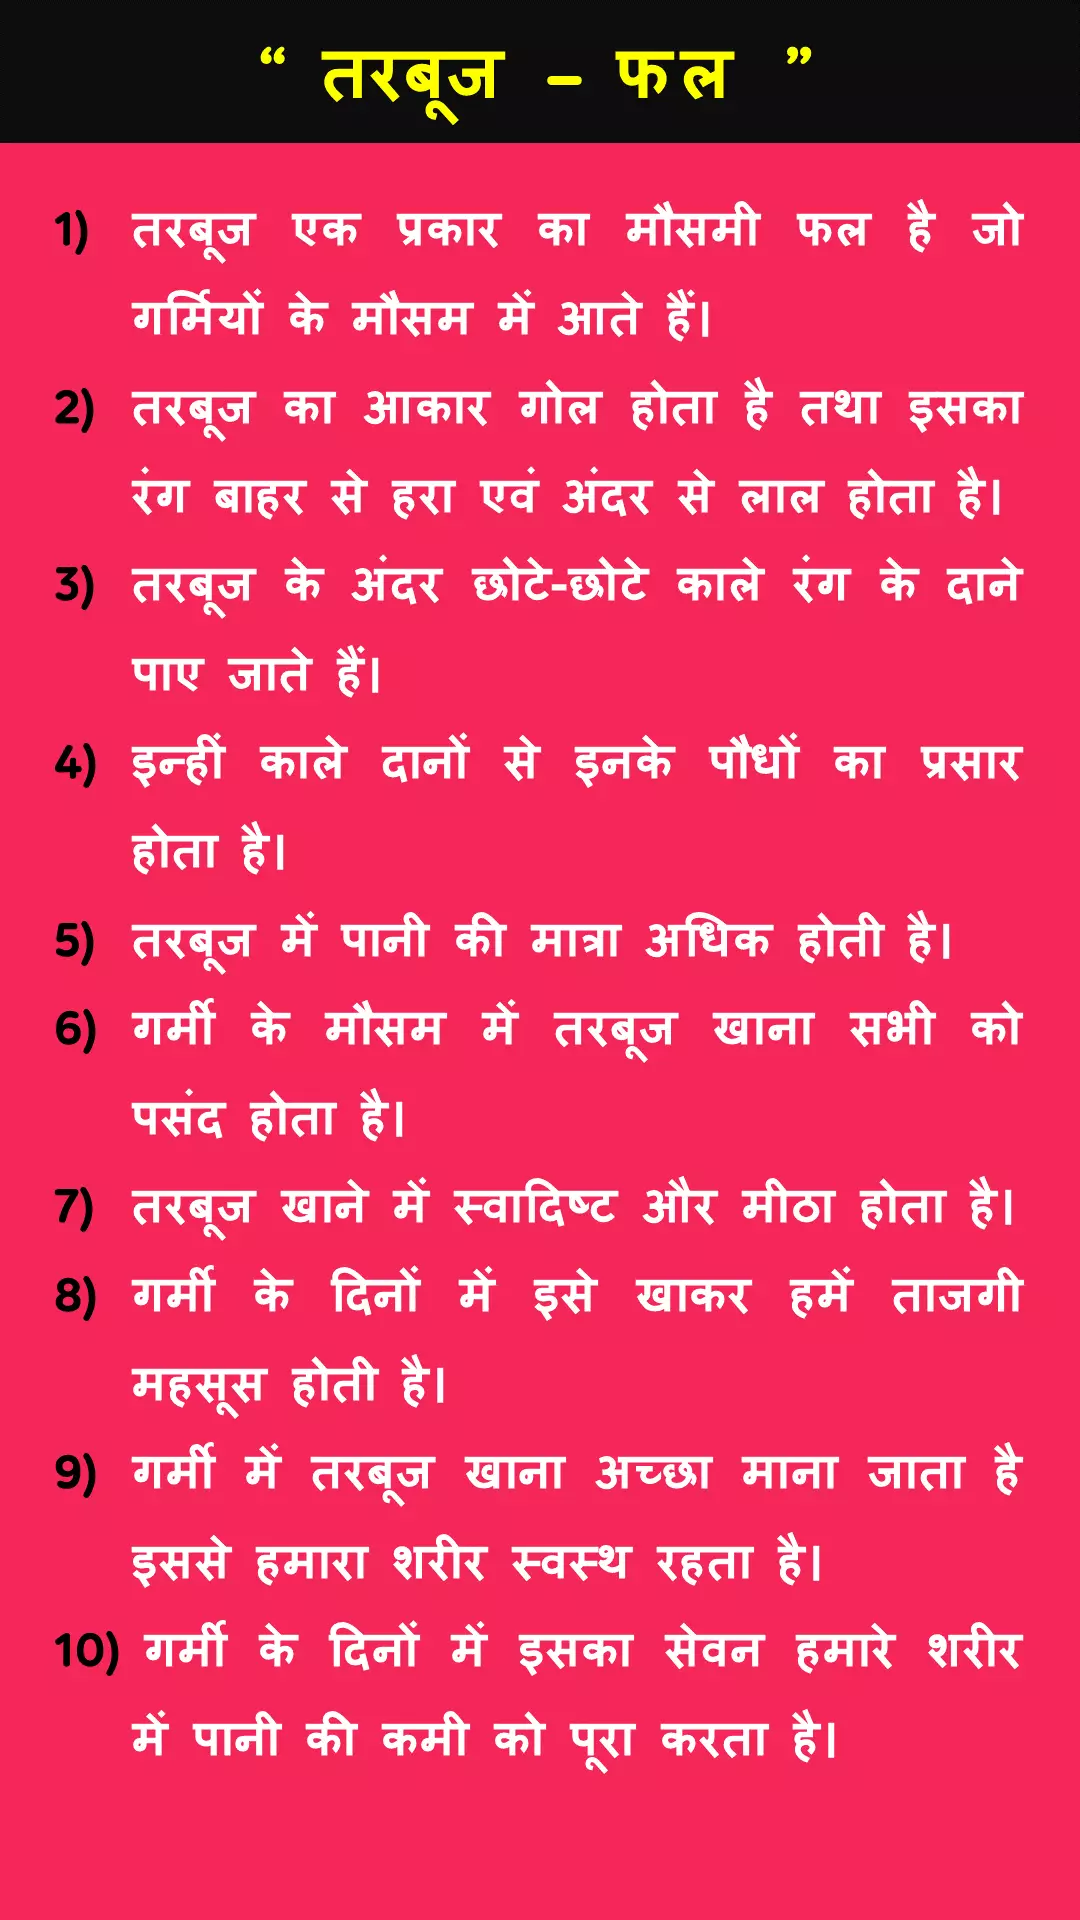 10 lines about watermelon in Hindi